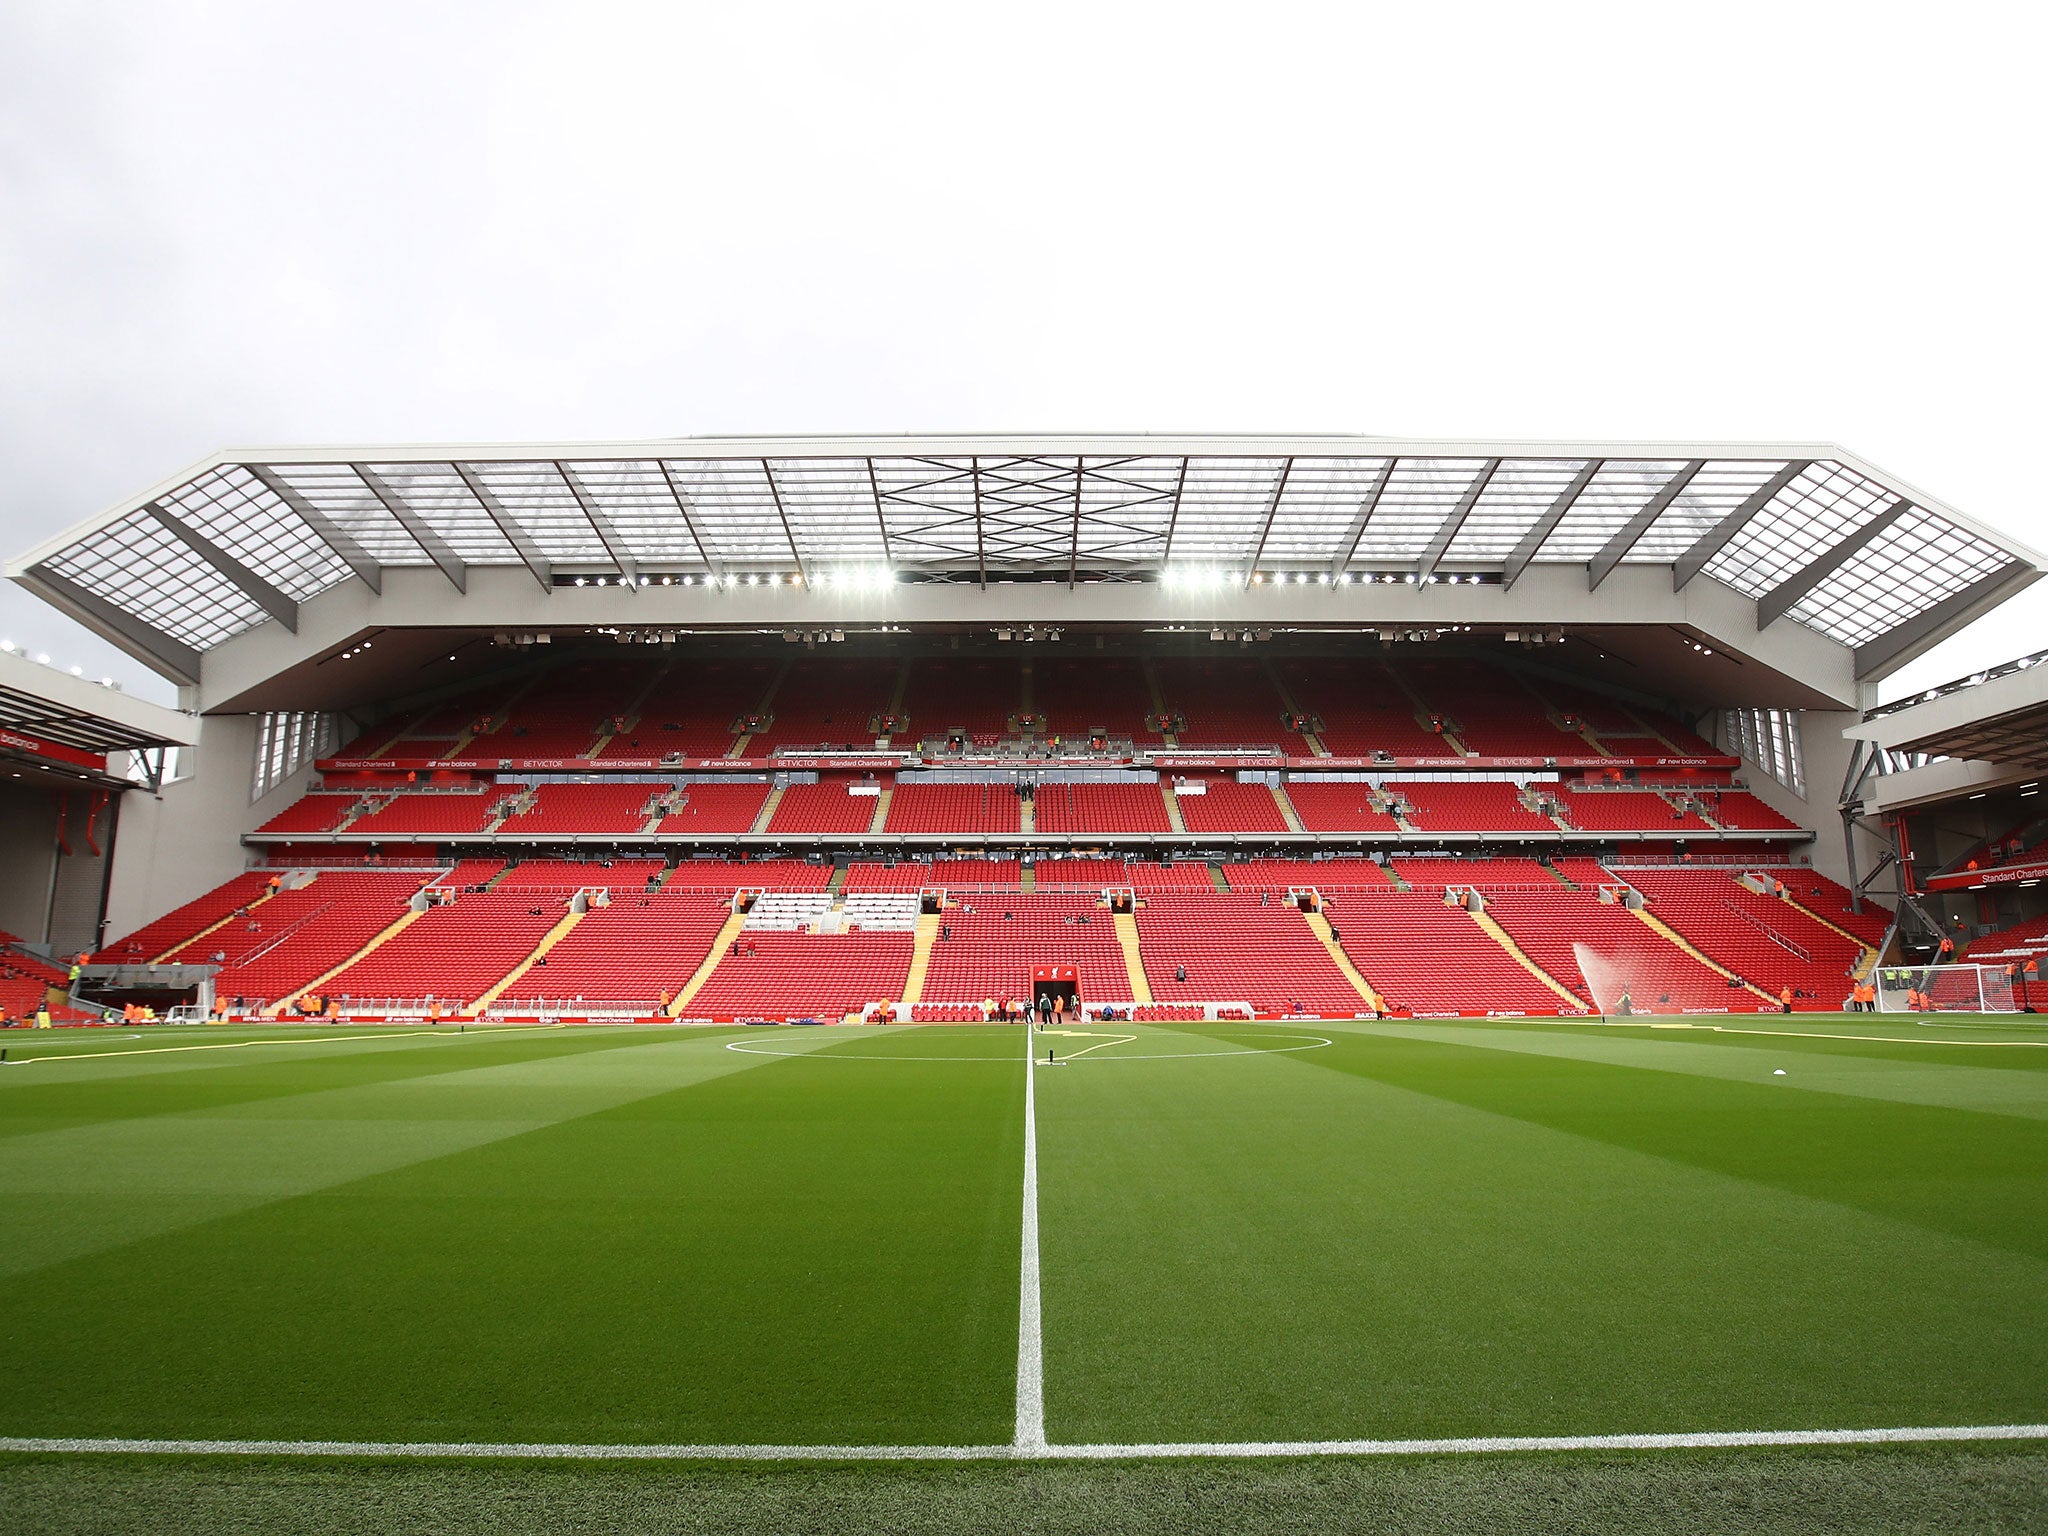 &#13;
Anfield's capacity has increased by 8,500 following the redevelopment of the main stand &#13;